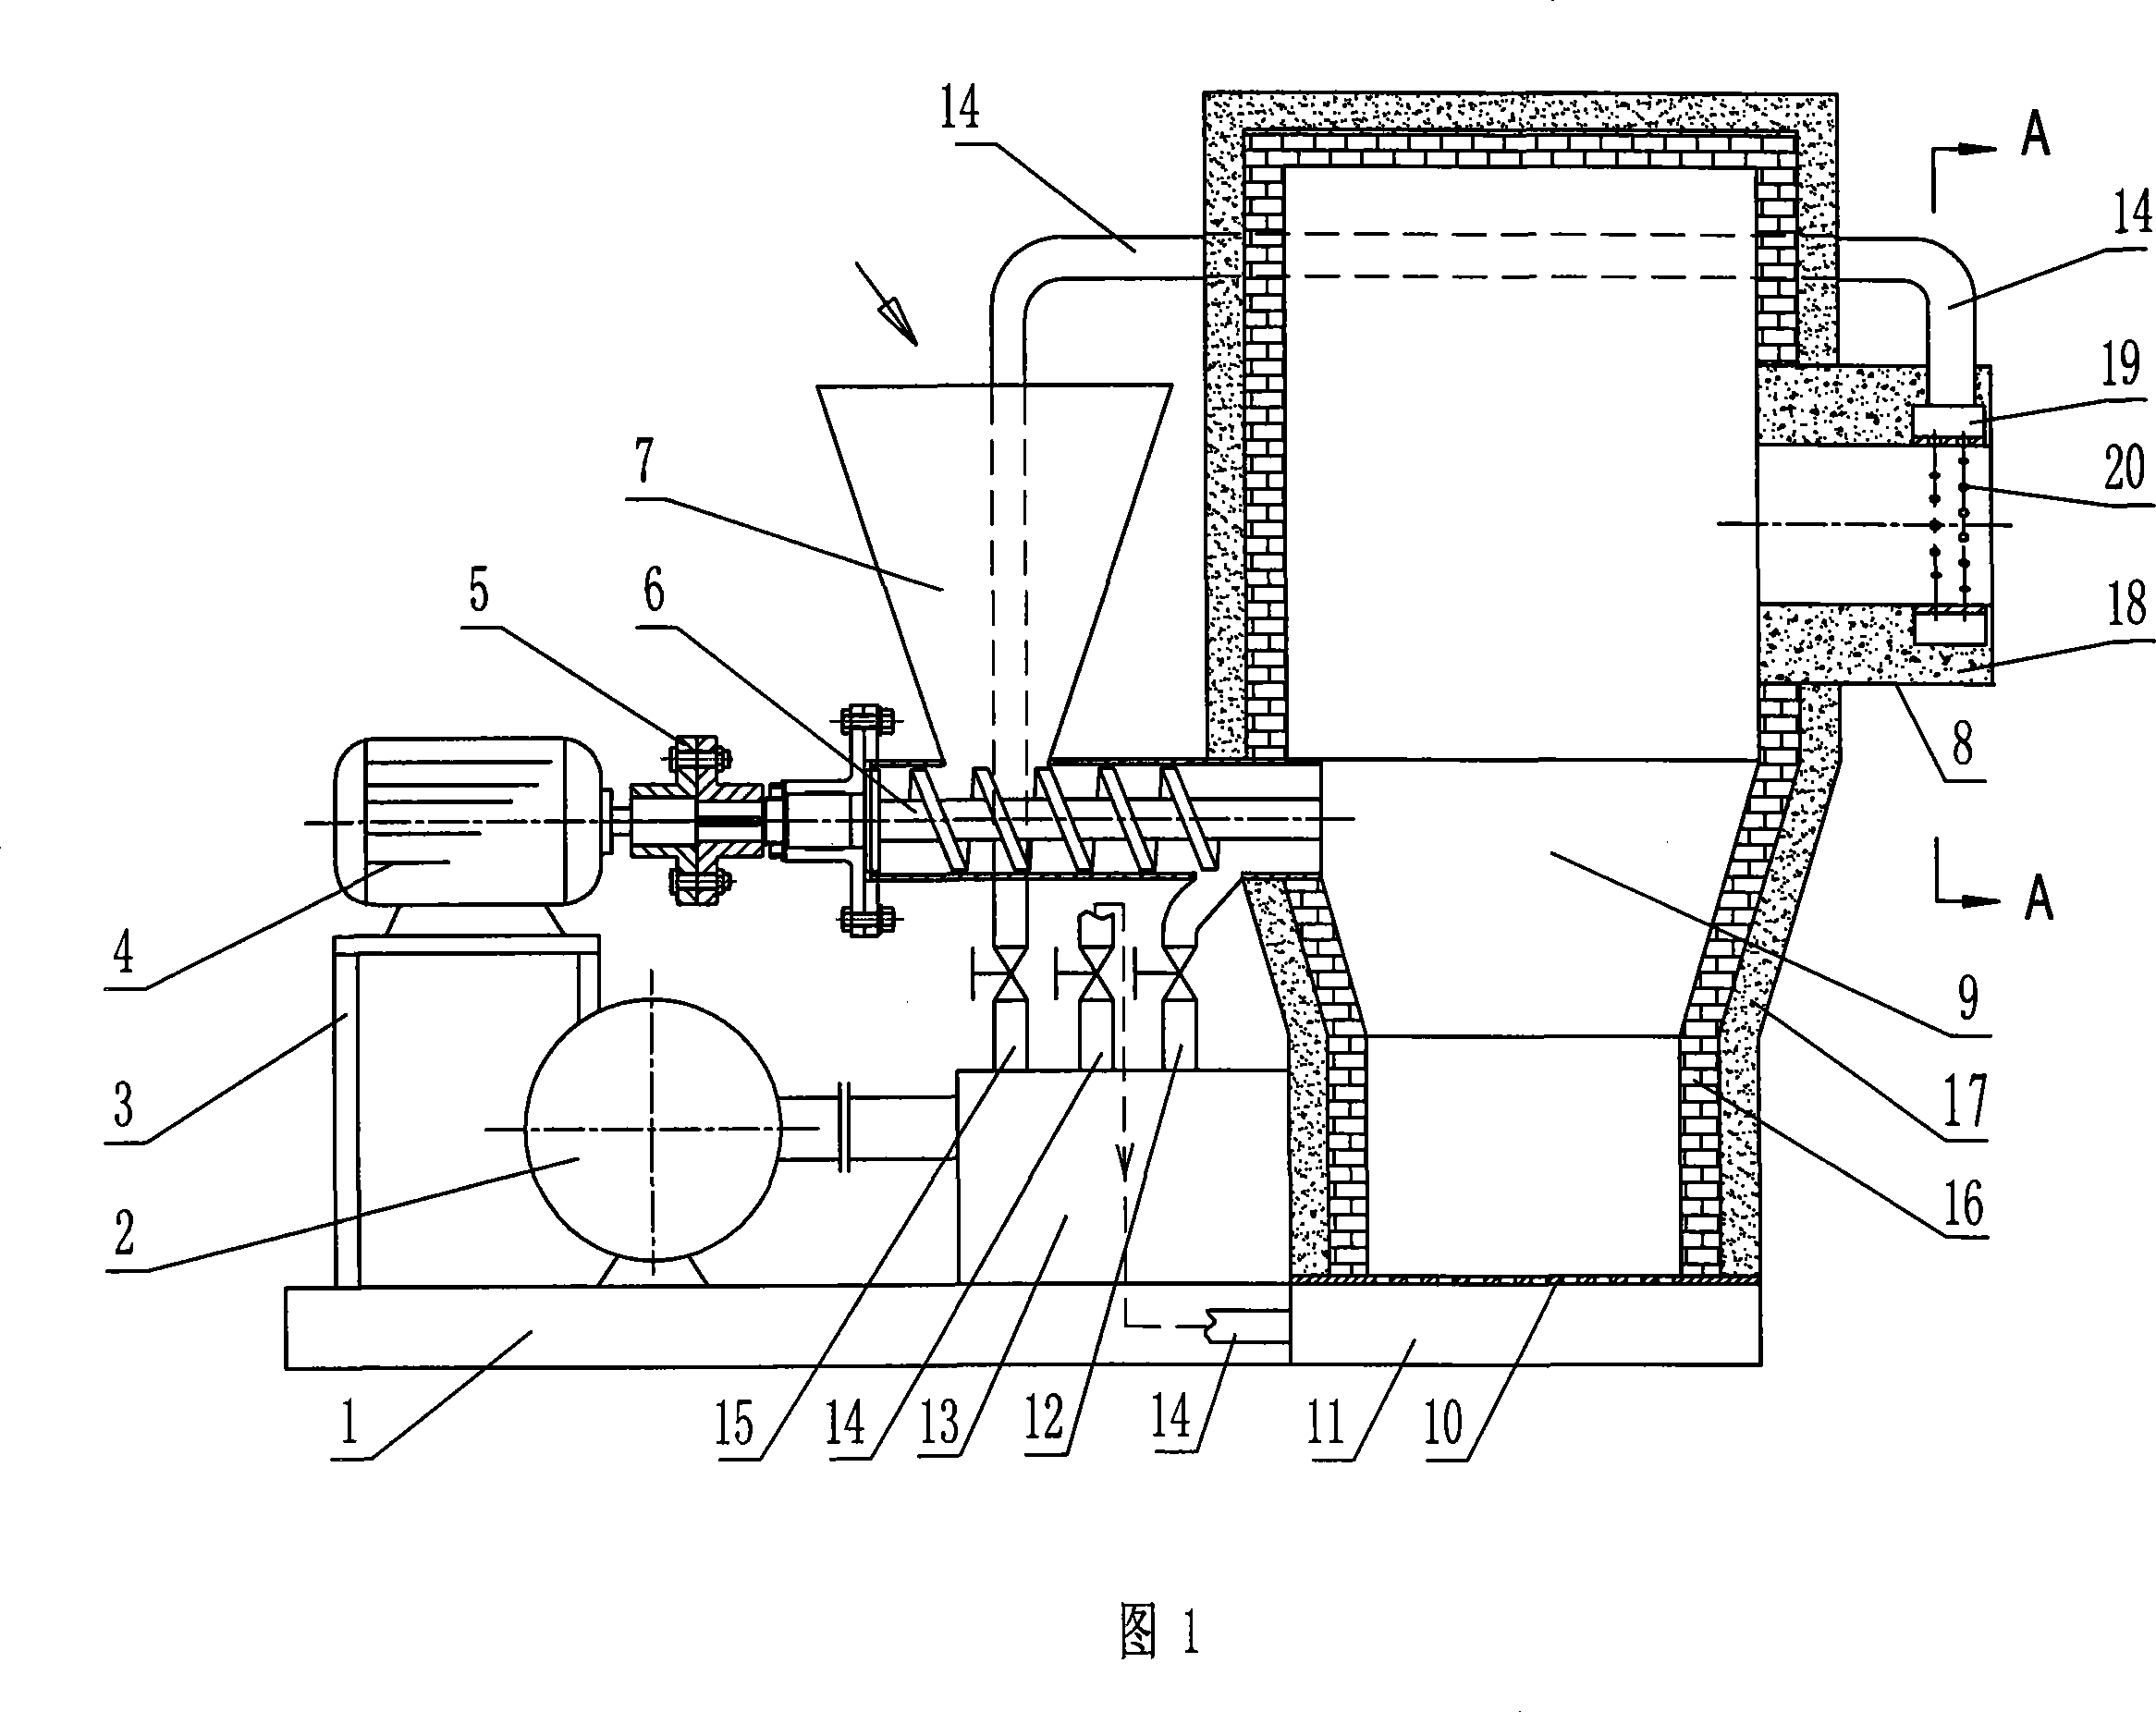 Method and apparatus for biomass ebullition, gasification and combustion